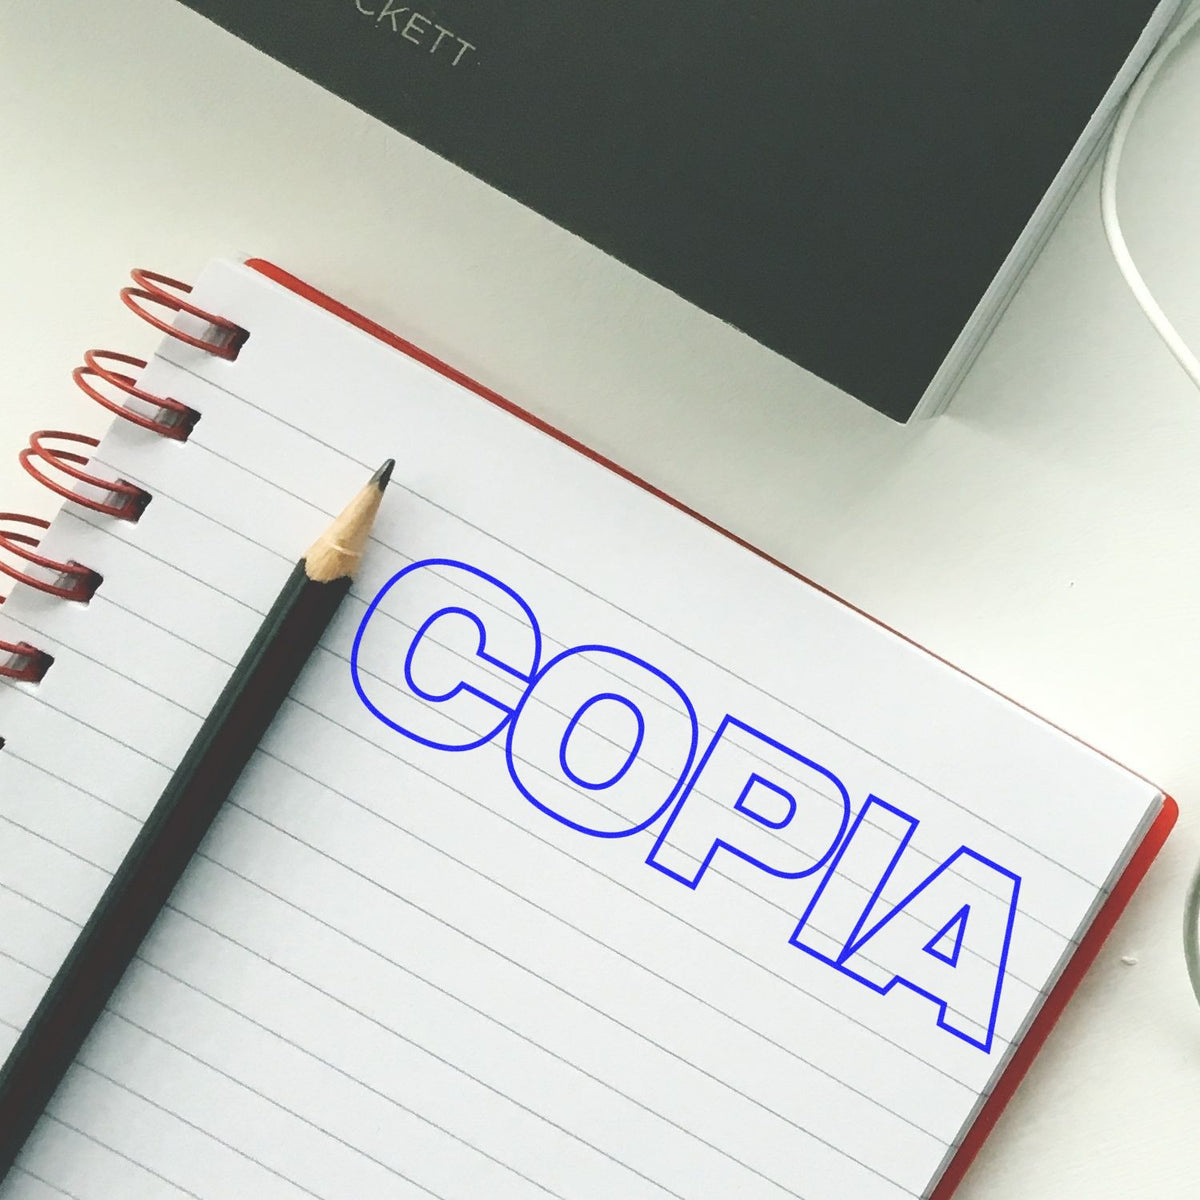 Self-Inking Copia Stamp In Use Photo